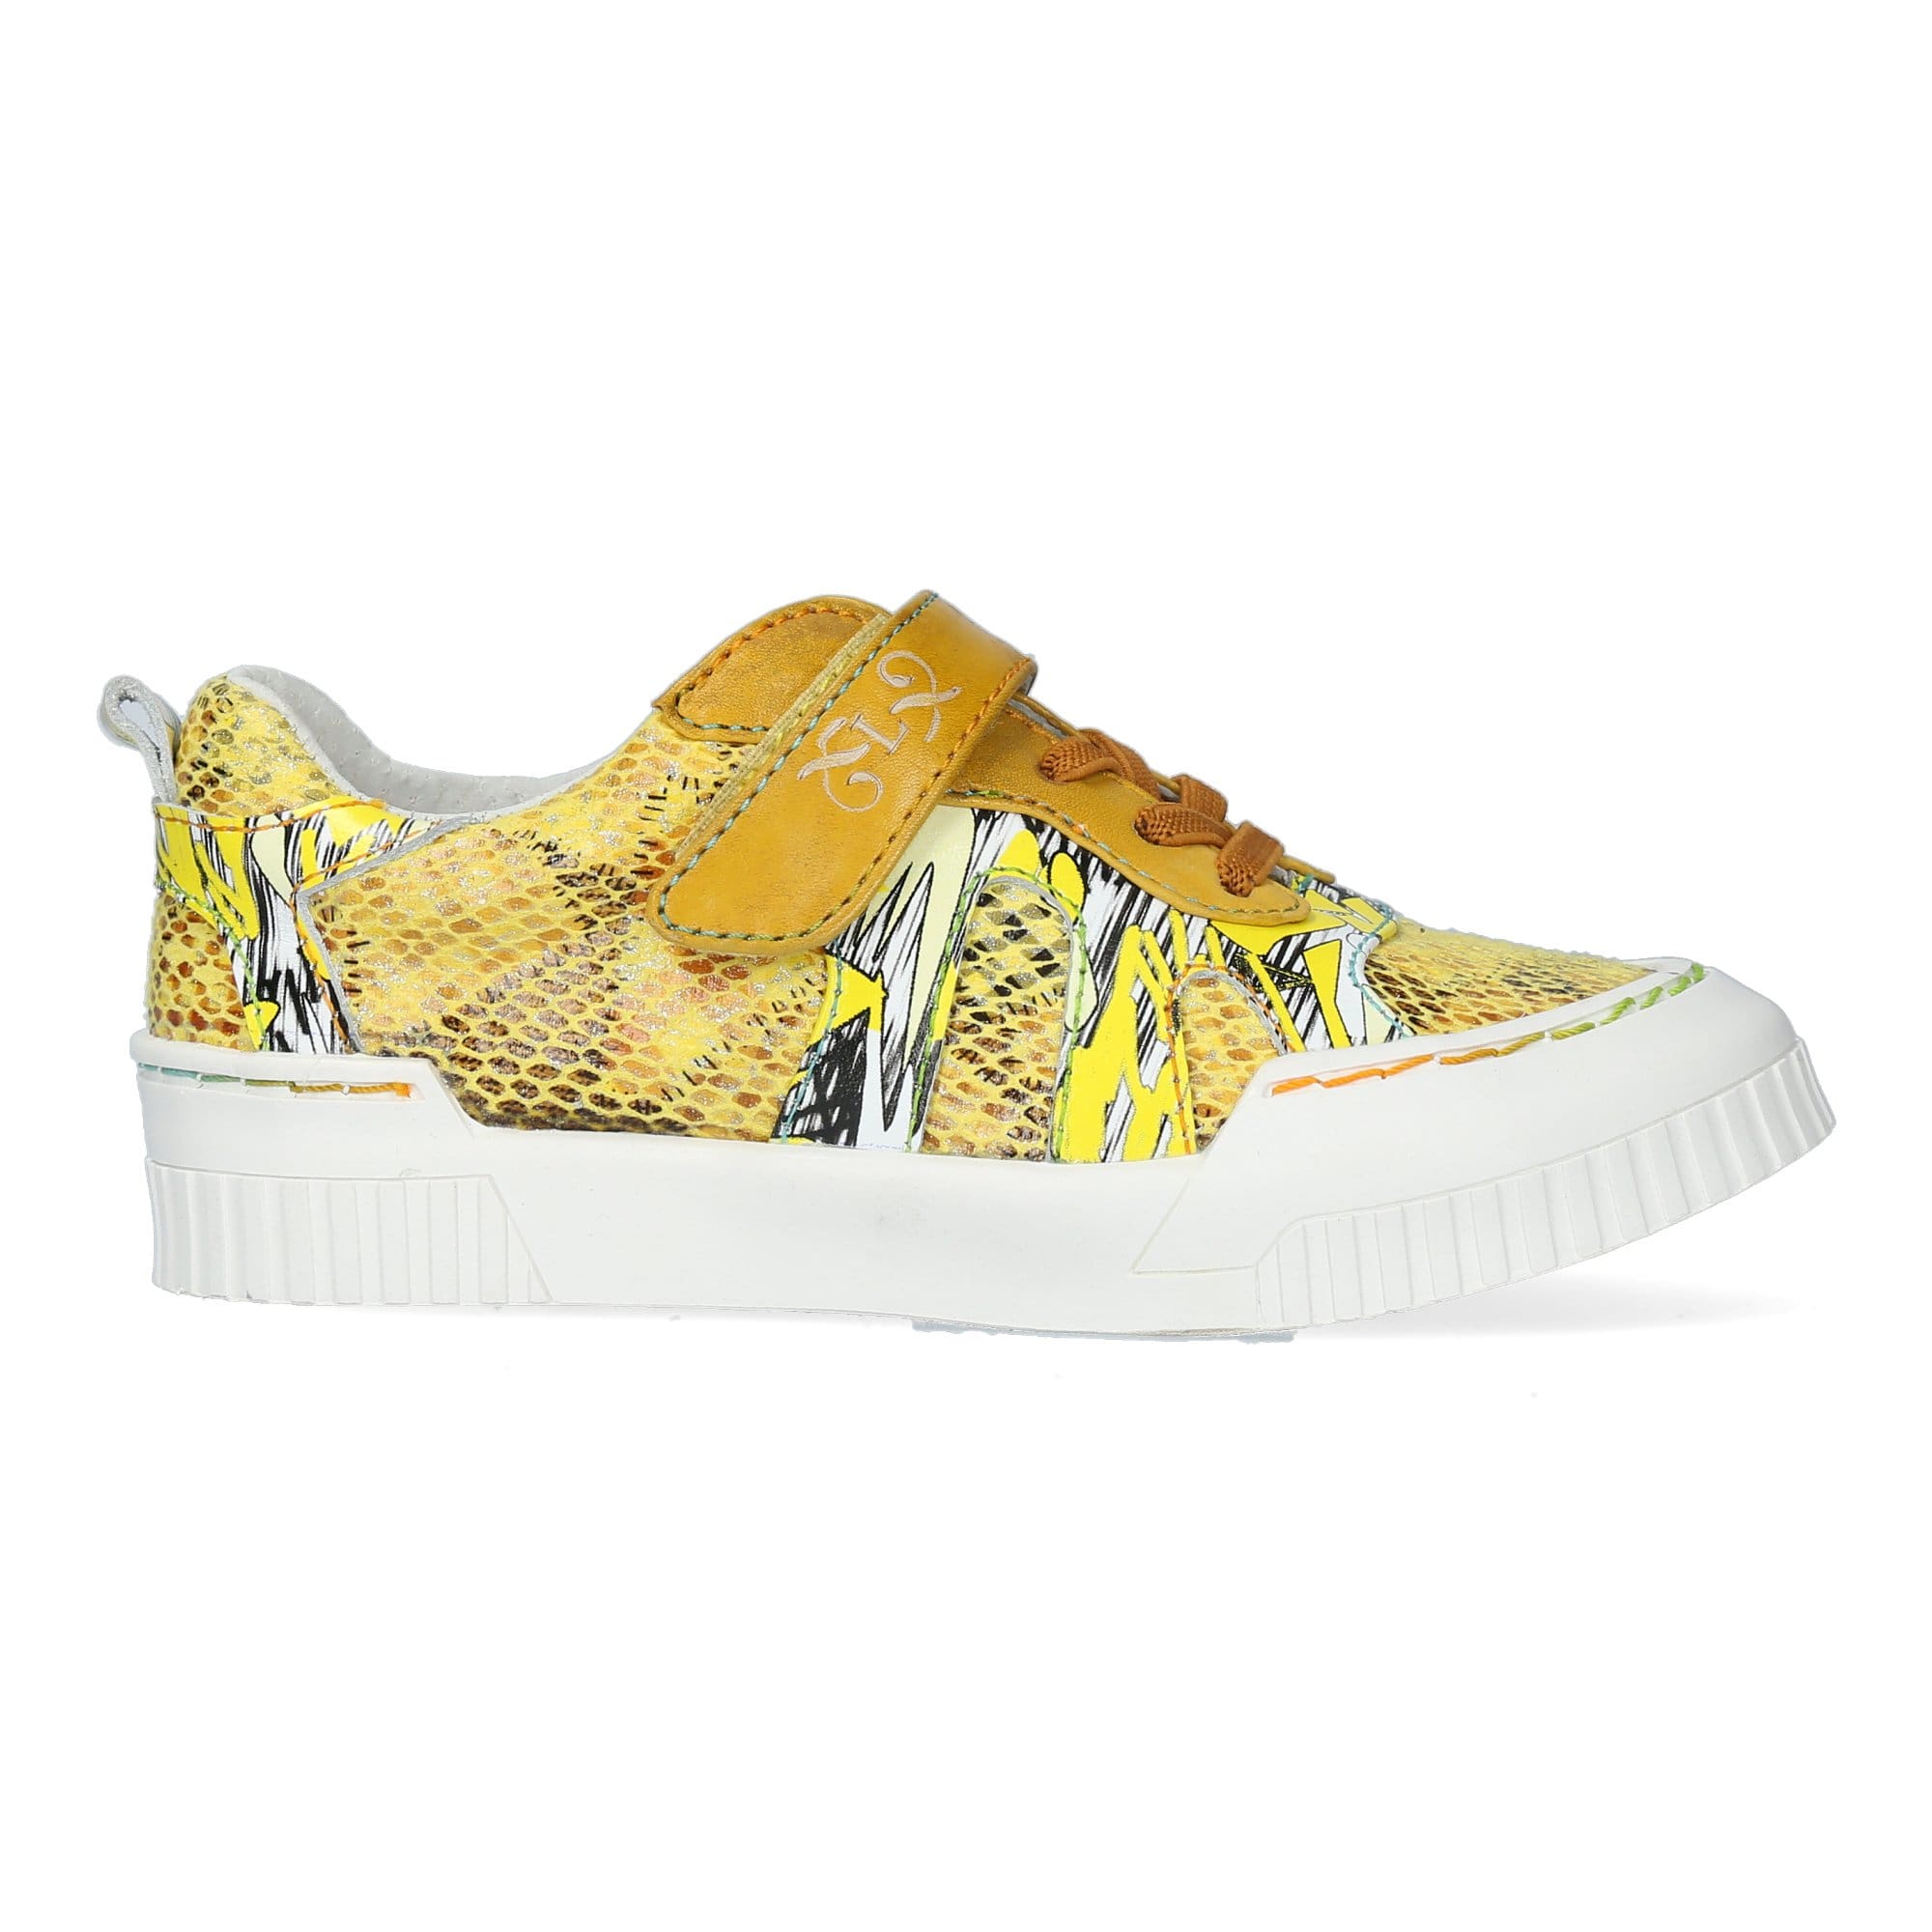 JULOULOU 01 shoes - 21 / Yellow - Child